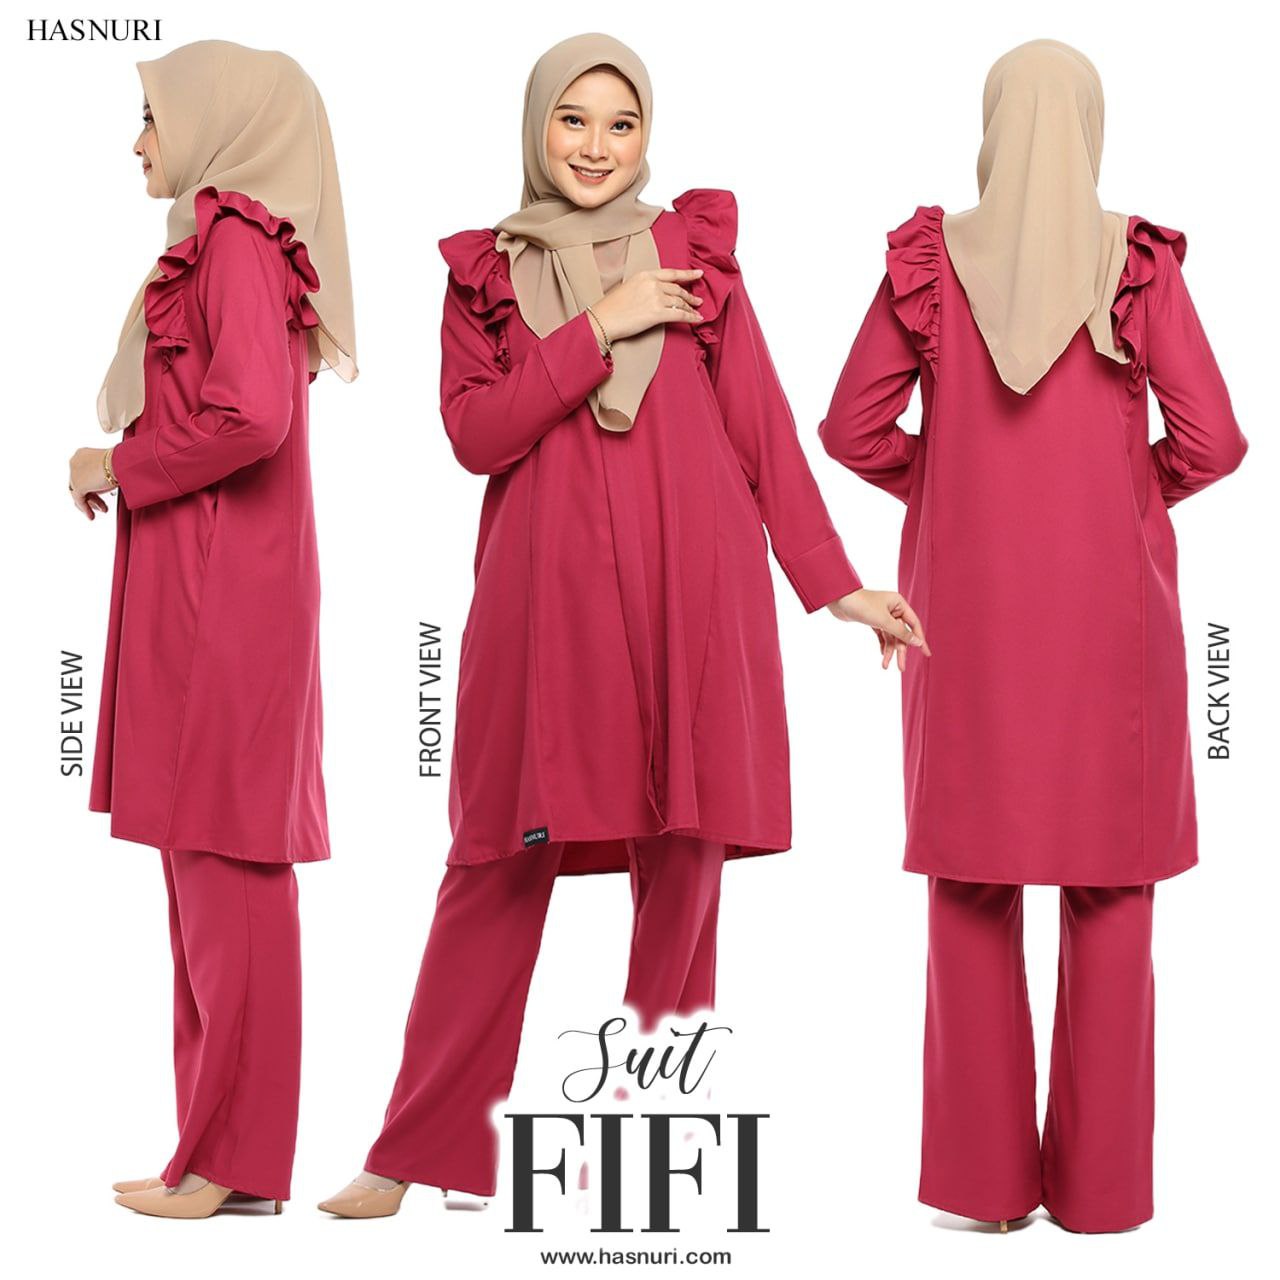 Suit Fifi - Red Maroon